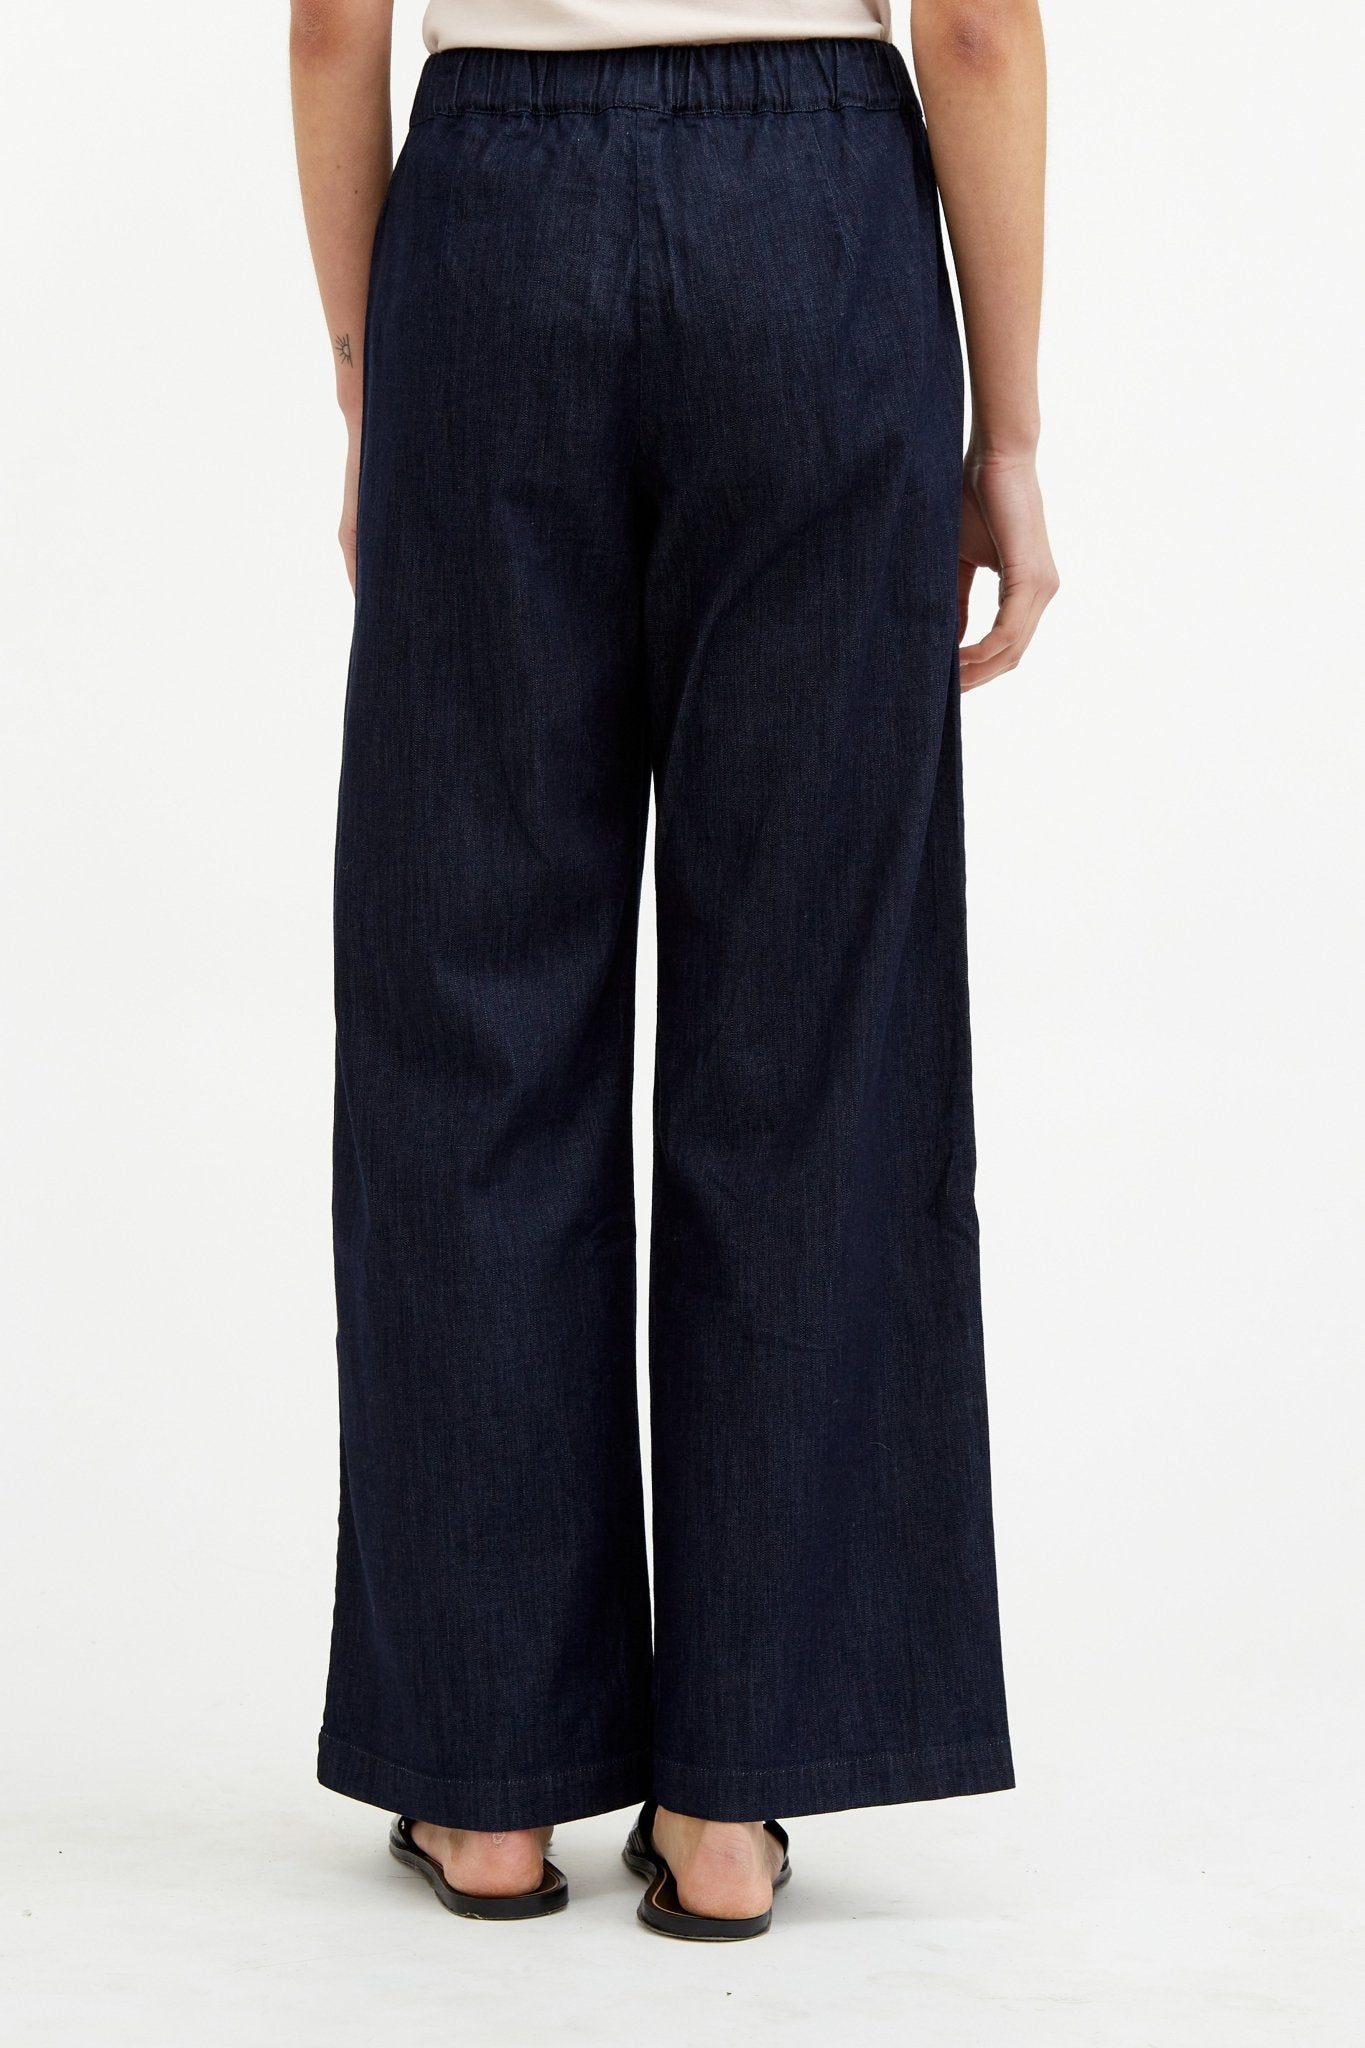 CHASE PANT IN LIGHTWEIGHT STRETCH DENIM - Jarbo